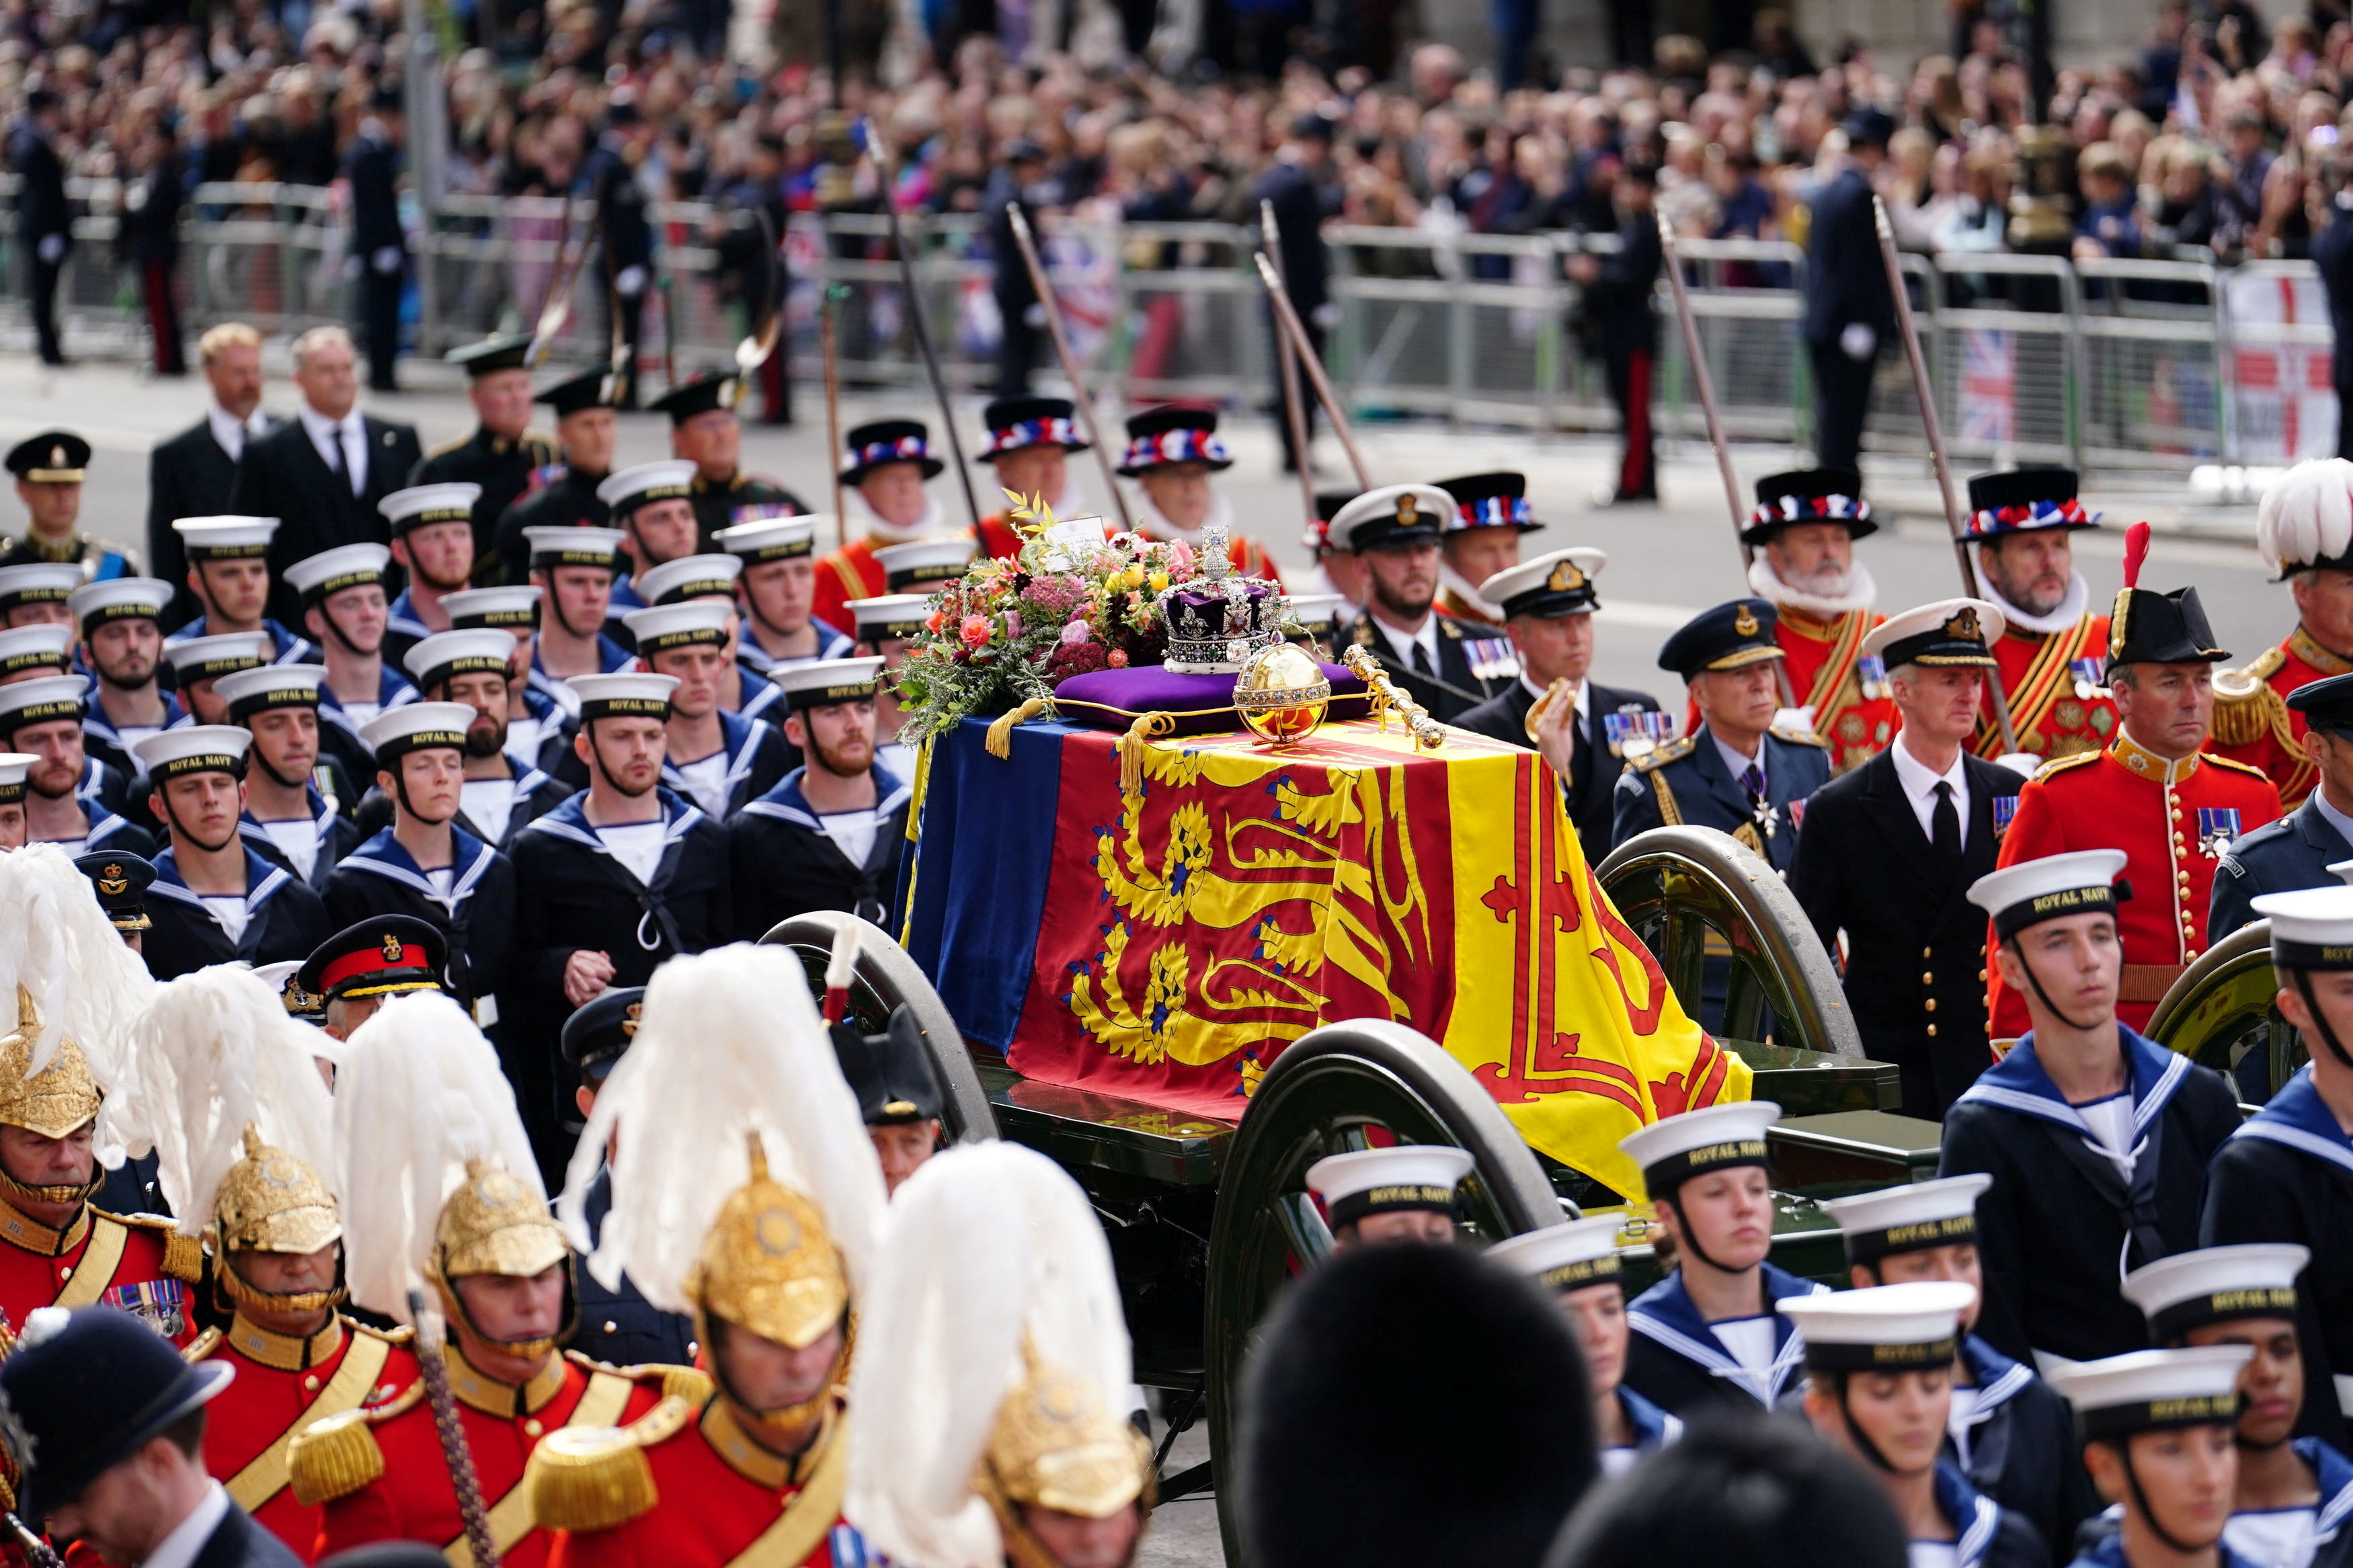 The State Gun Carriage carries the coffin of Queen Elizabeth II, draped in the Royal Standard with the Imperial State Crown and the Sovereign's orb and sceptre, in the Ceremonial Procession following her State Funeral at Westminster Abbey, London. Picture date: Monday September 19, 2022. David Davies/Pool via REUTERS